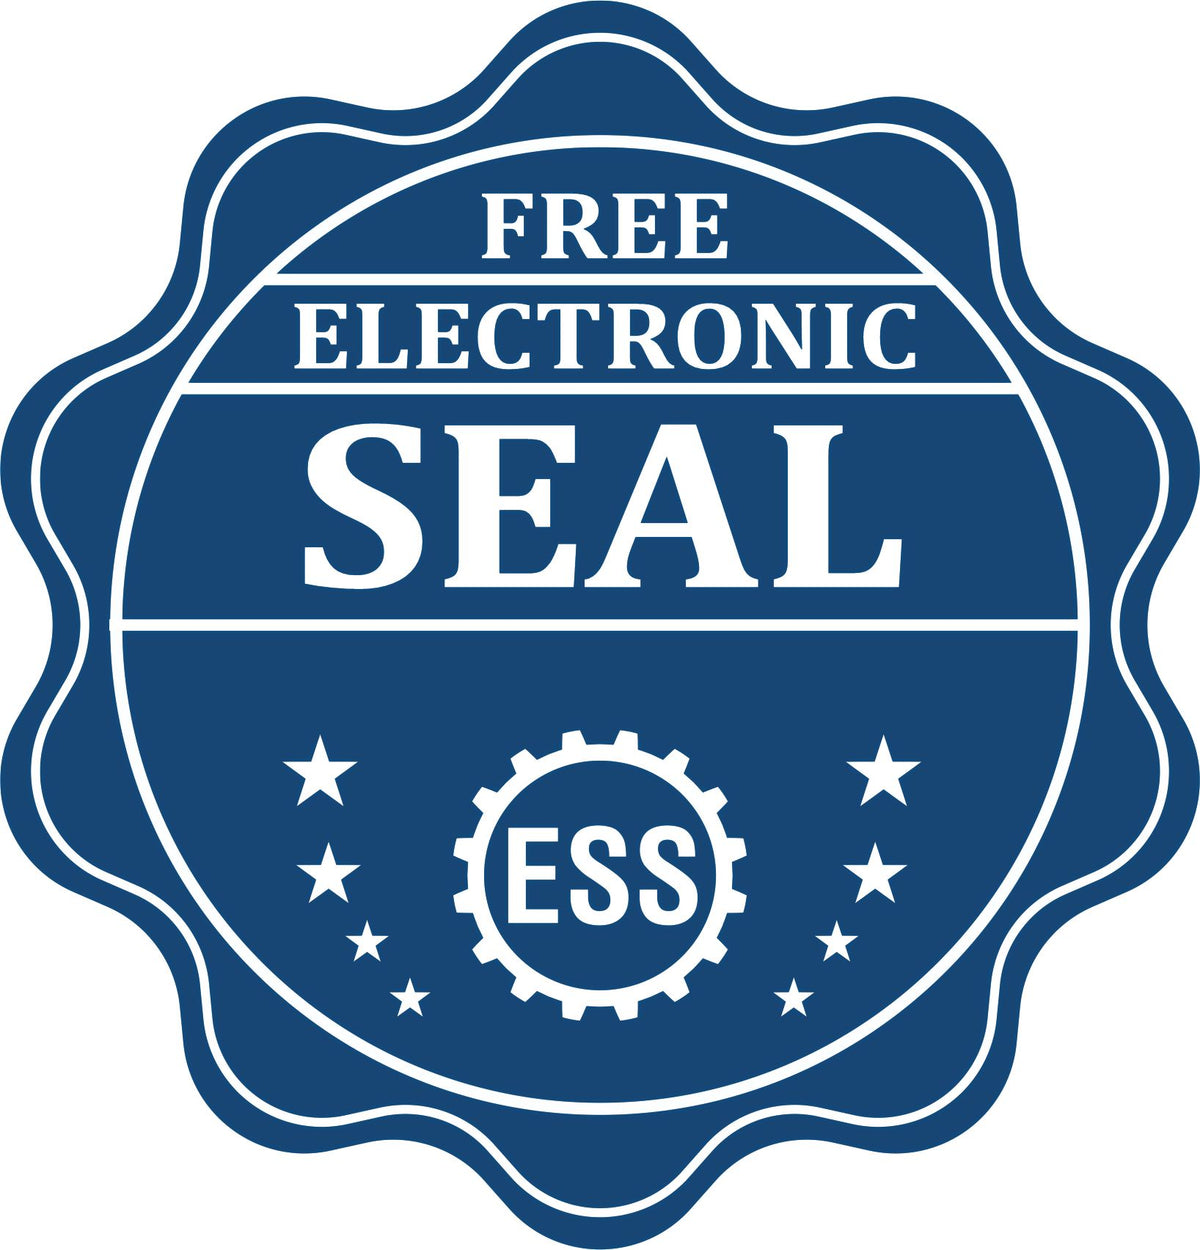 A badge showing a free electronic seal for the Premium MaxLight Pre-Inked Washington Landscape Architectural Stamp with stars and the ESS gear on the emblem.